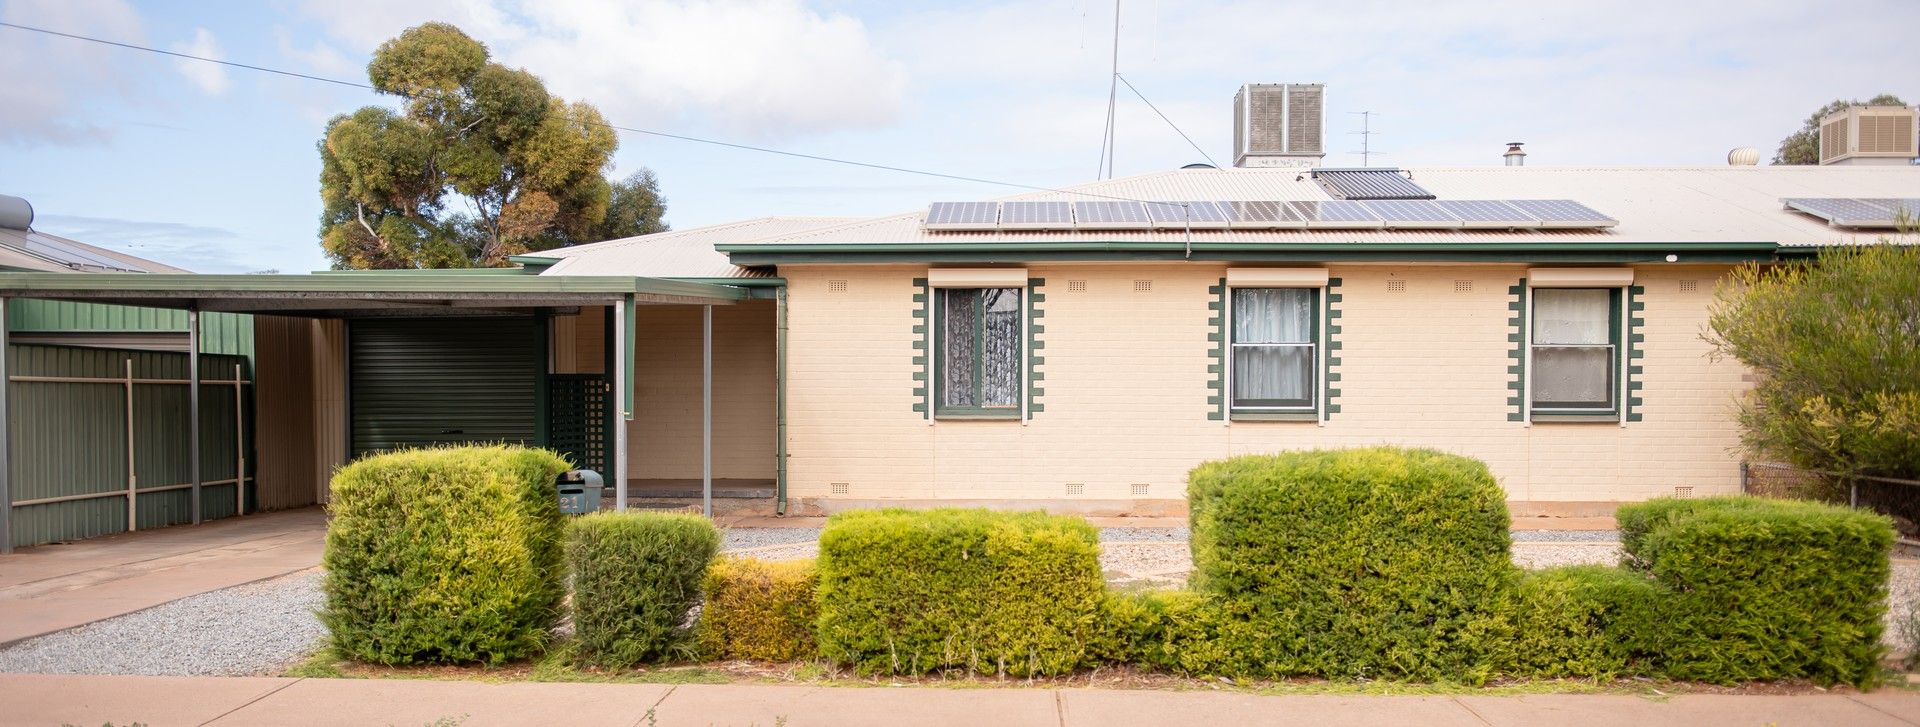 4 bedrooms Semi-Detached in 21 Bevan Crescent, Whyalla Stuart WHYALLA SA, 5600